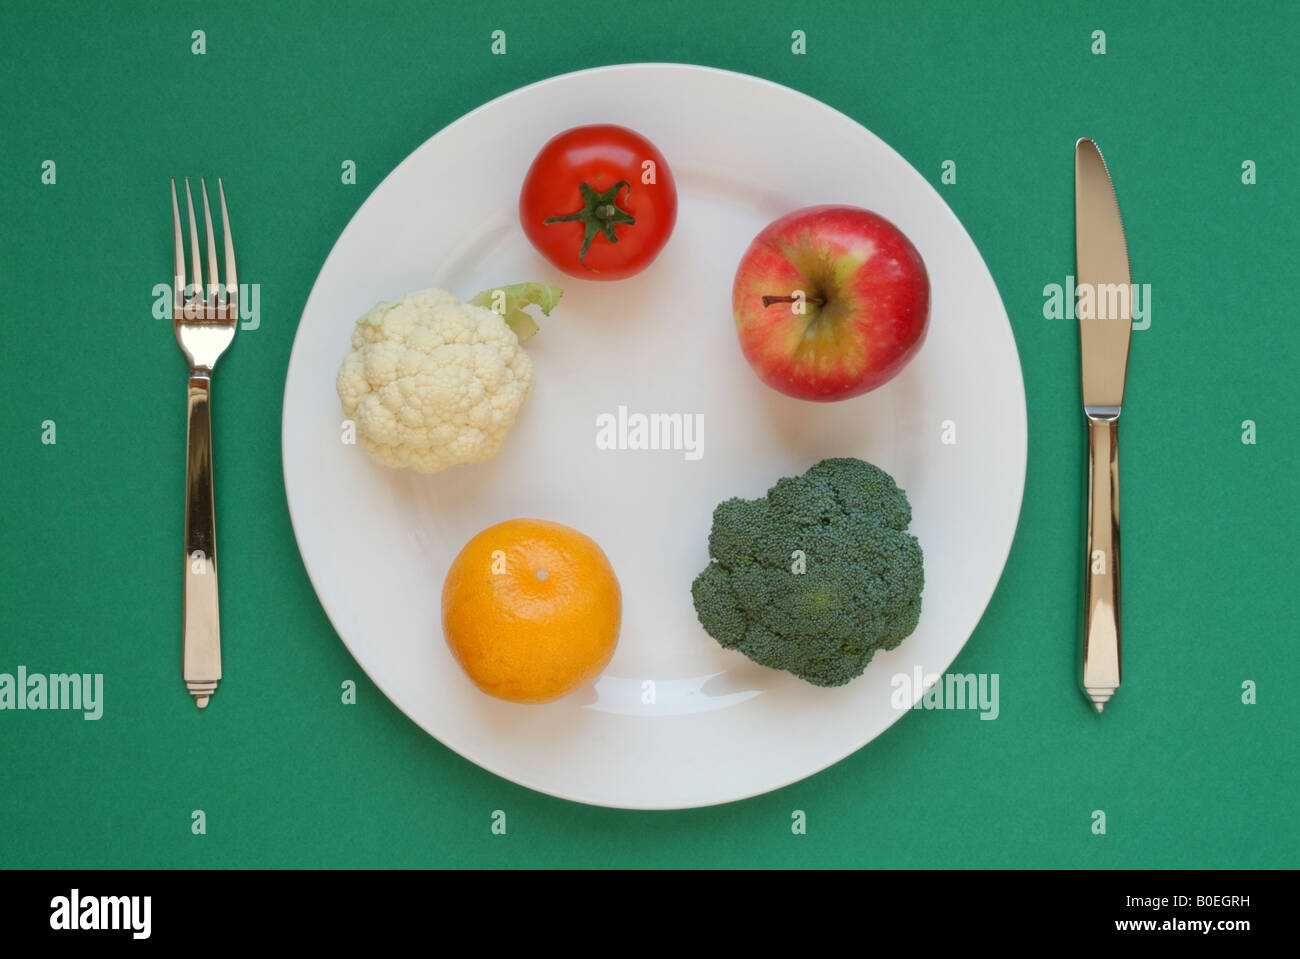 Eat five portions of fruit and vegetables a day Stock Photo